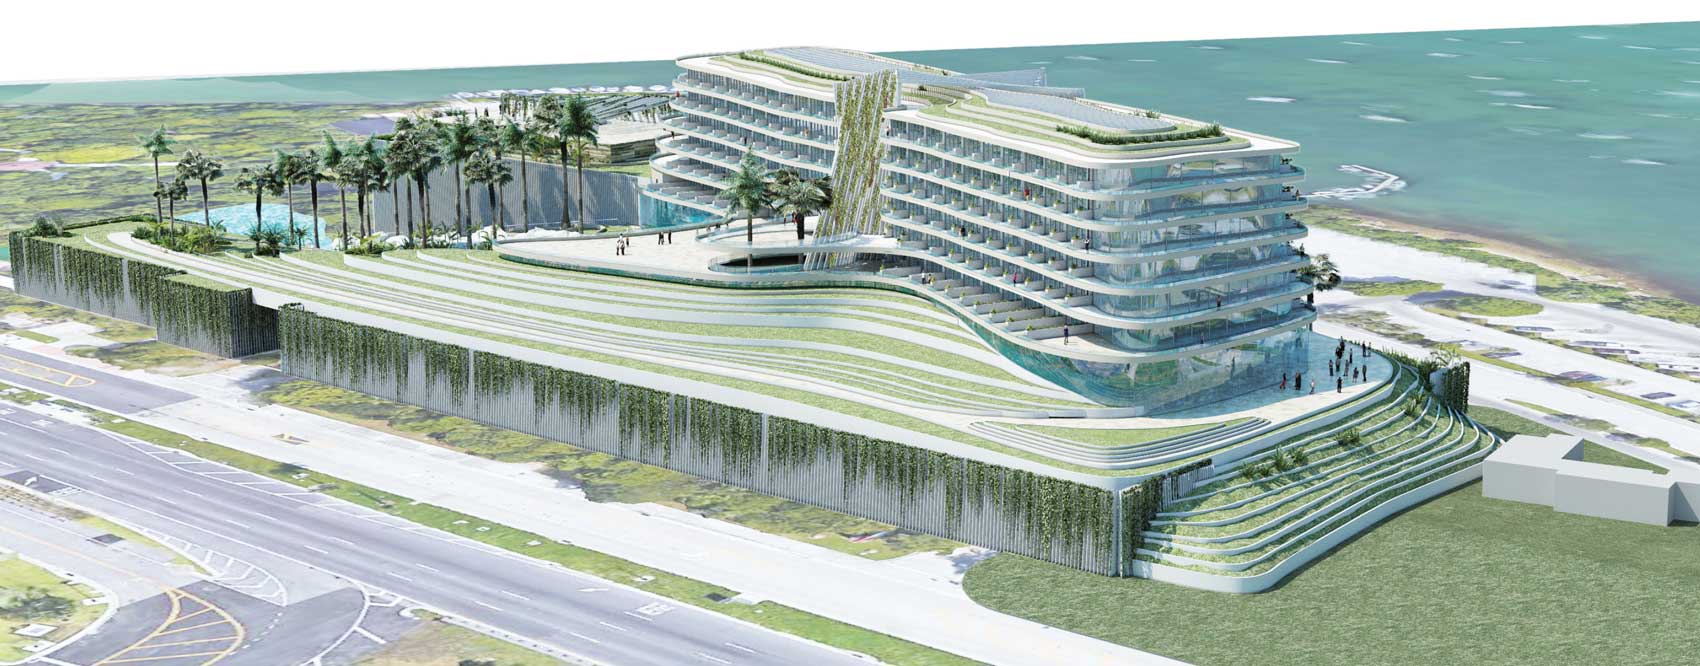 Voters get last word on Jungle Island hotel, lease extension